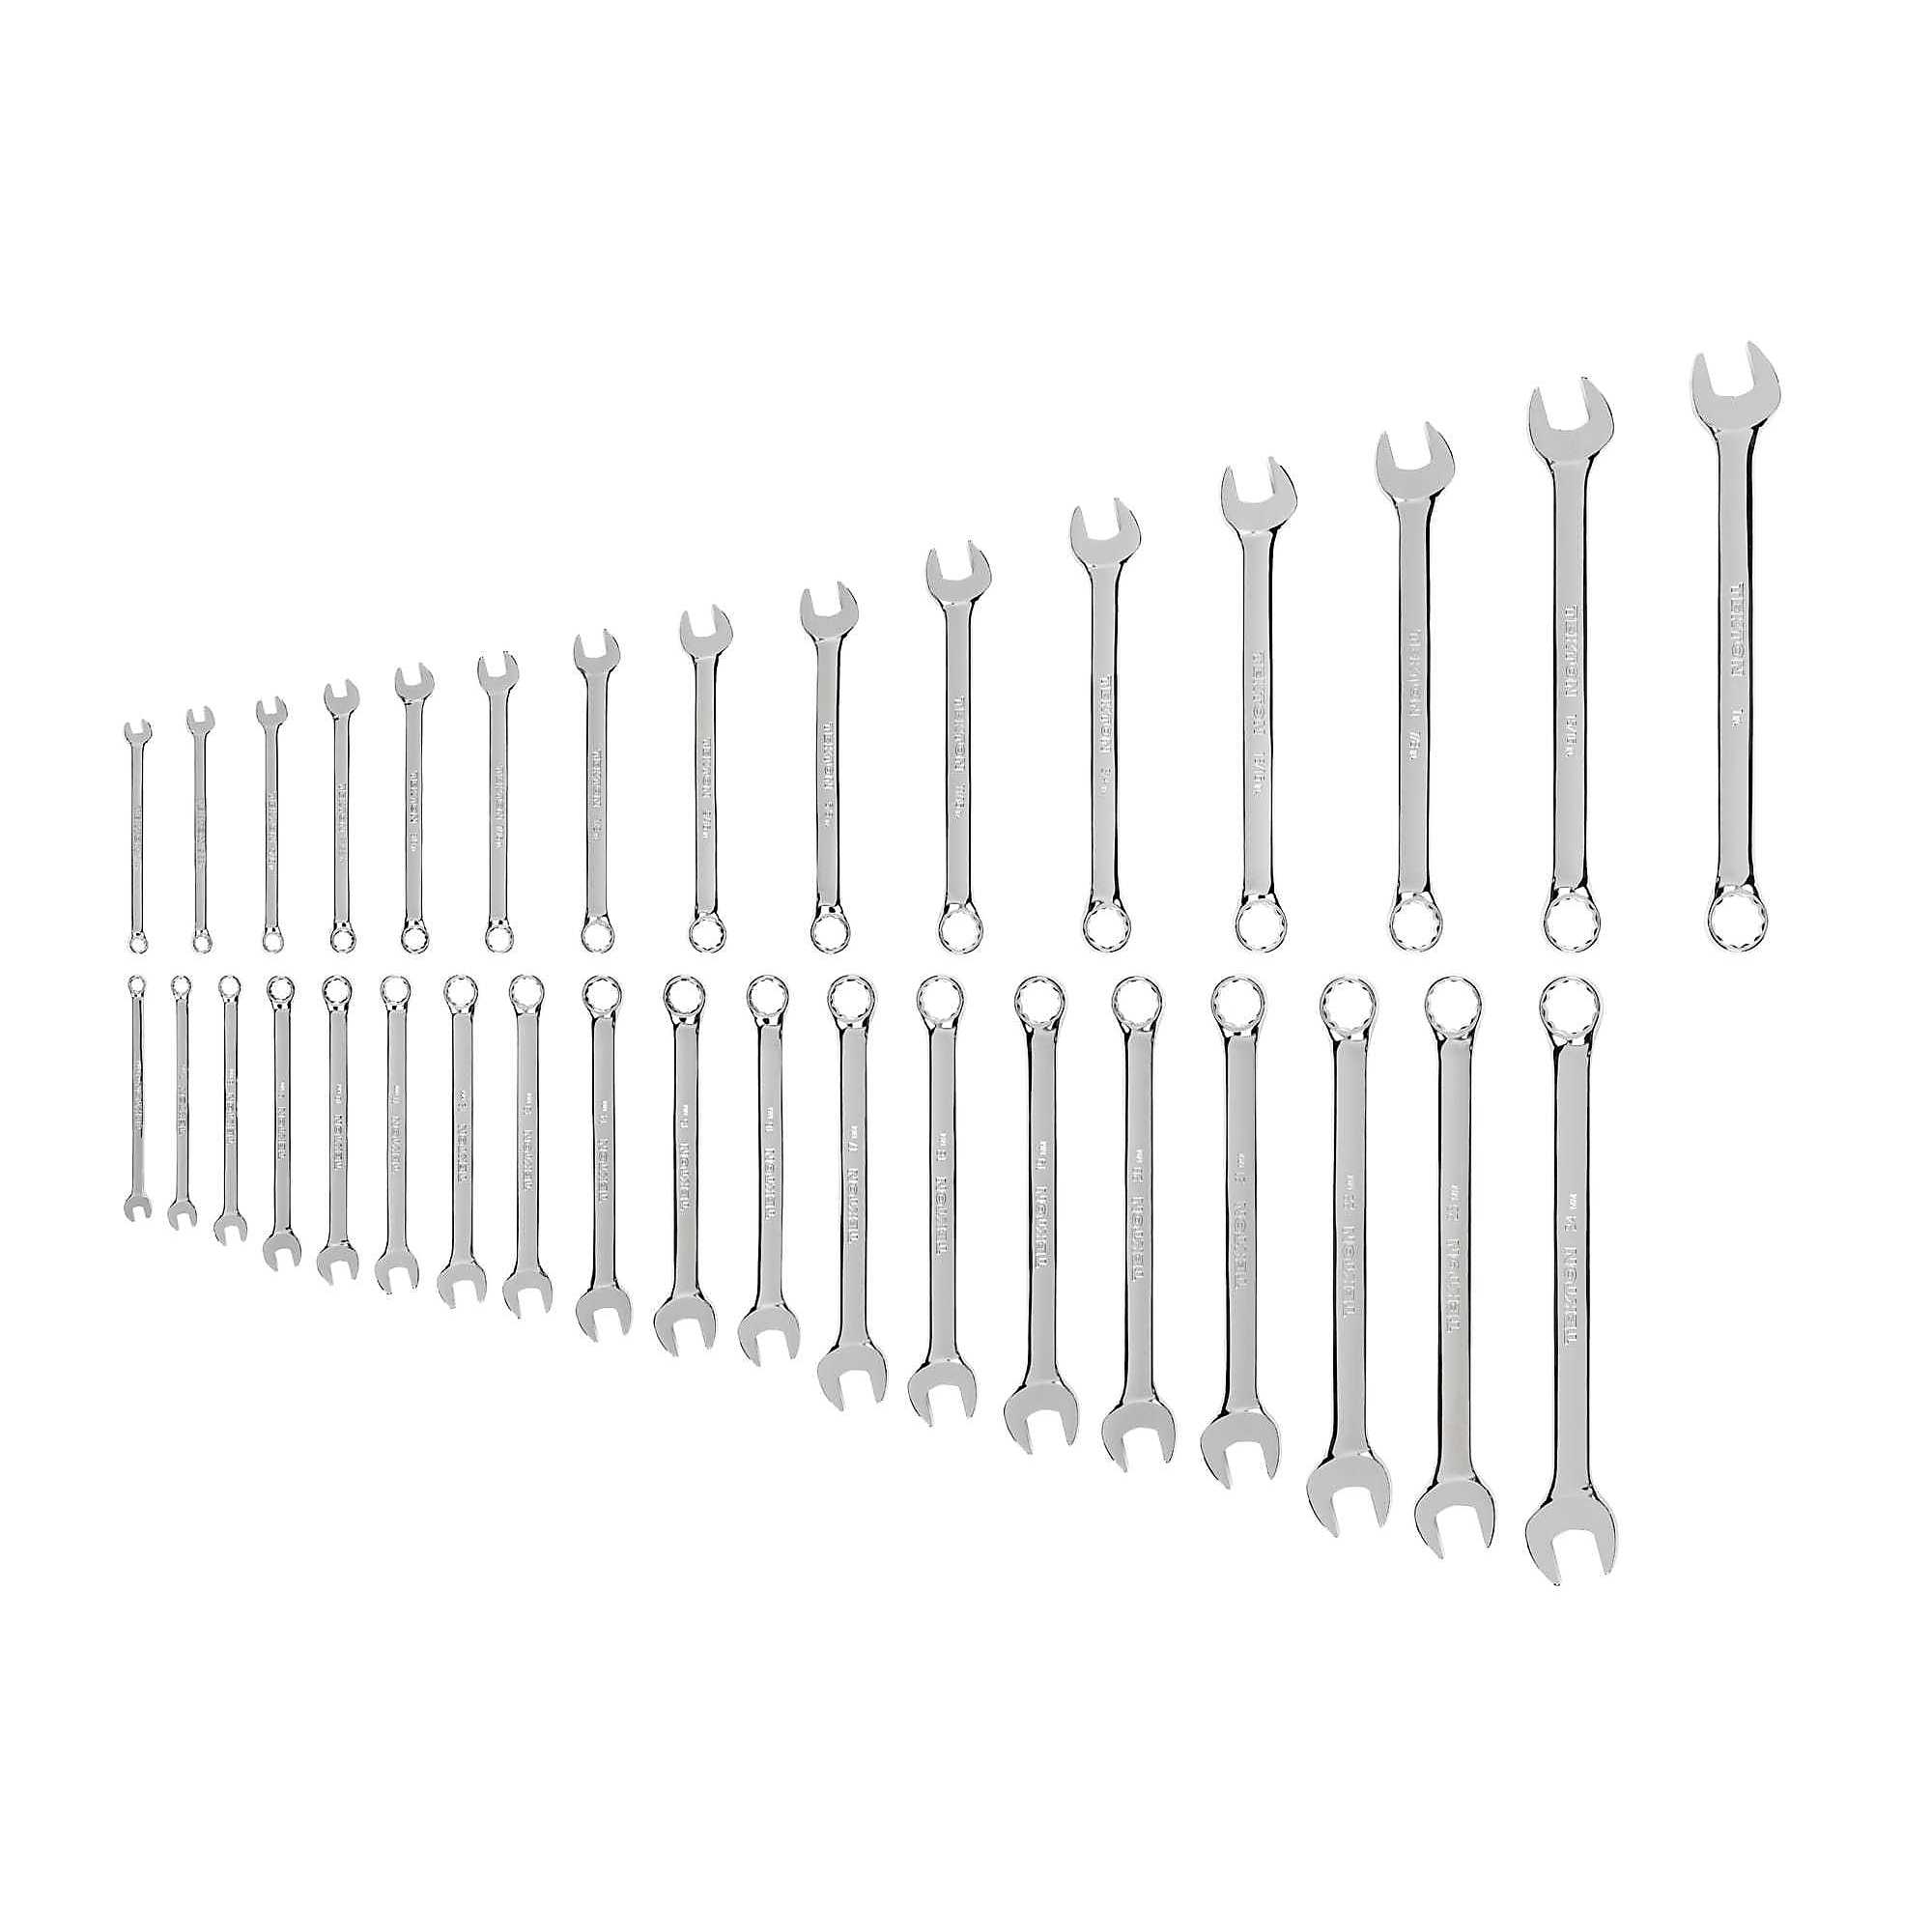 Tekton, 34-Piece SAE and Metric Combination Wrench Set, Pieces (qty.) 34 Measurement Standard Standard (SAE)/Metric, Model WCB90302